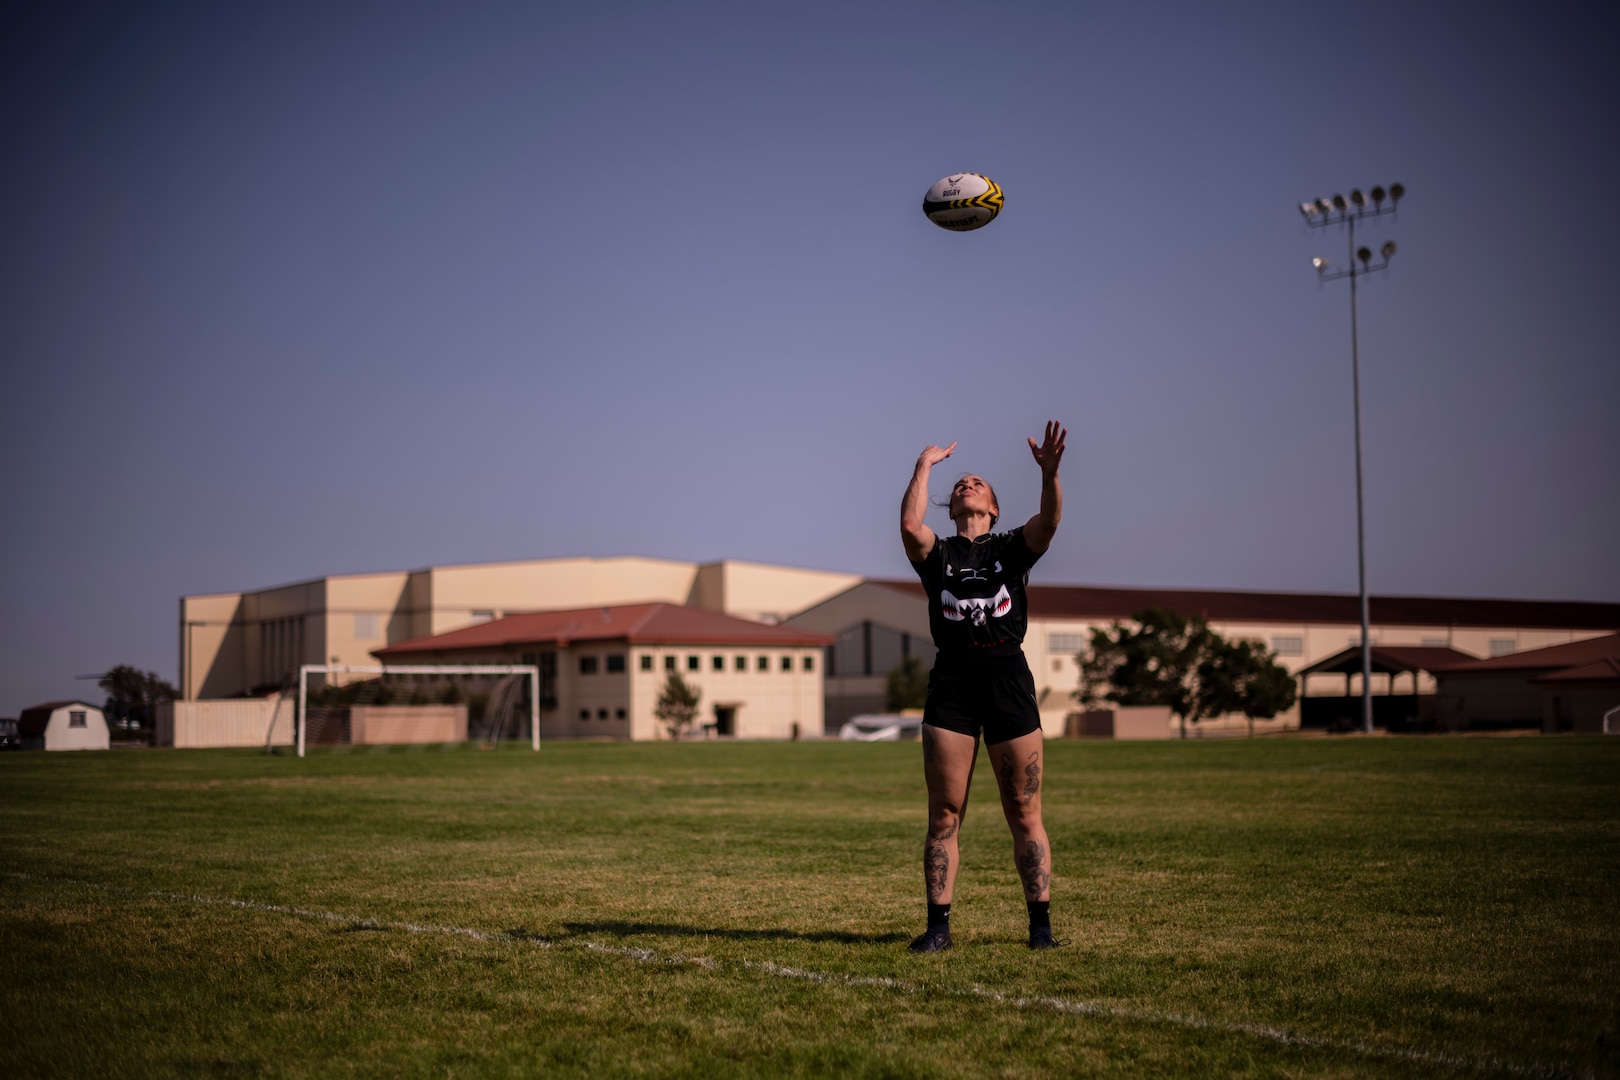 A woman stands on a soccer field and tosses a rugby ball in the air above her head.